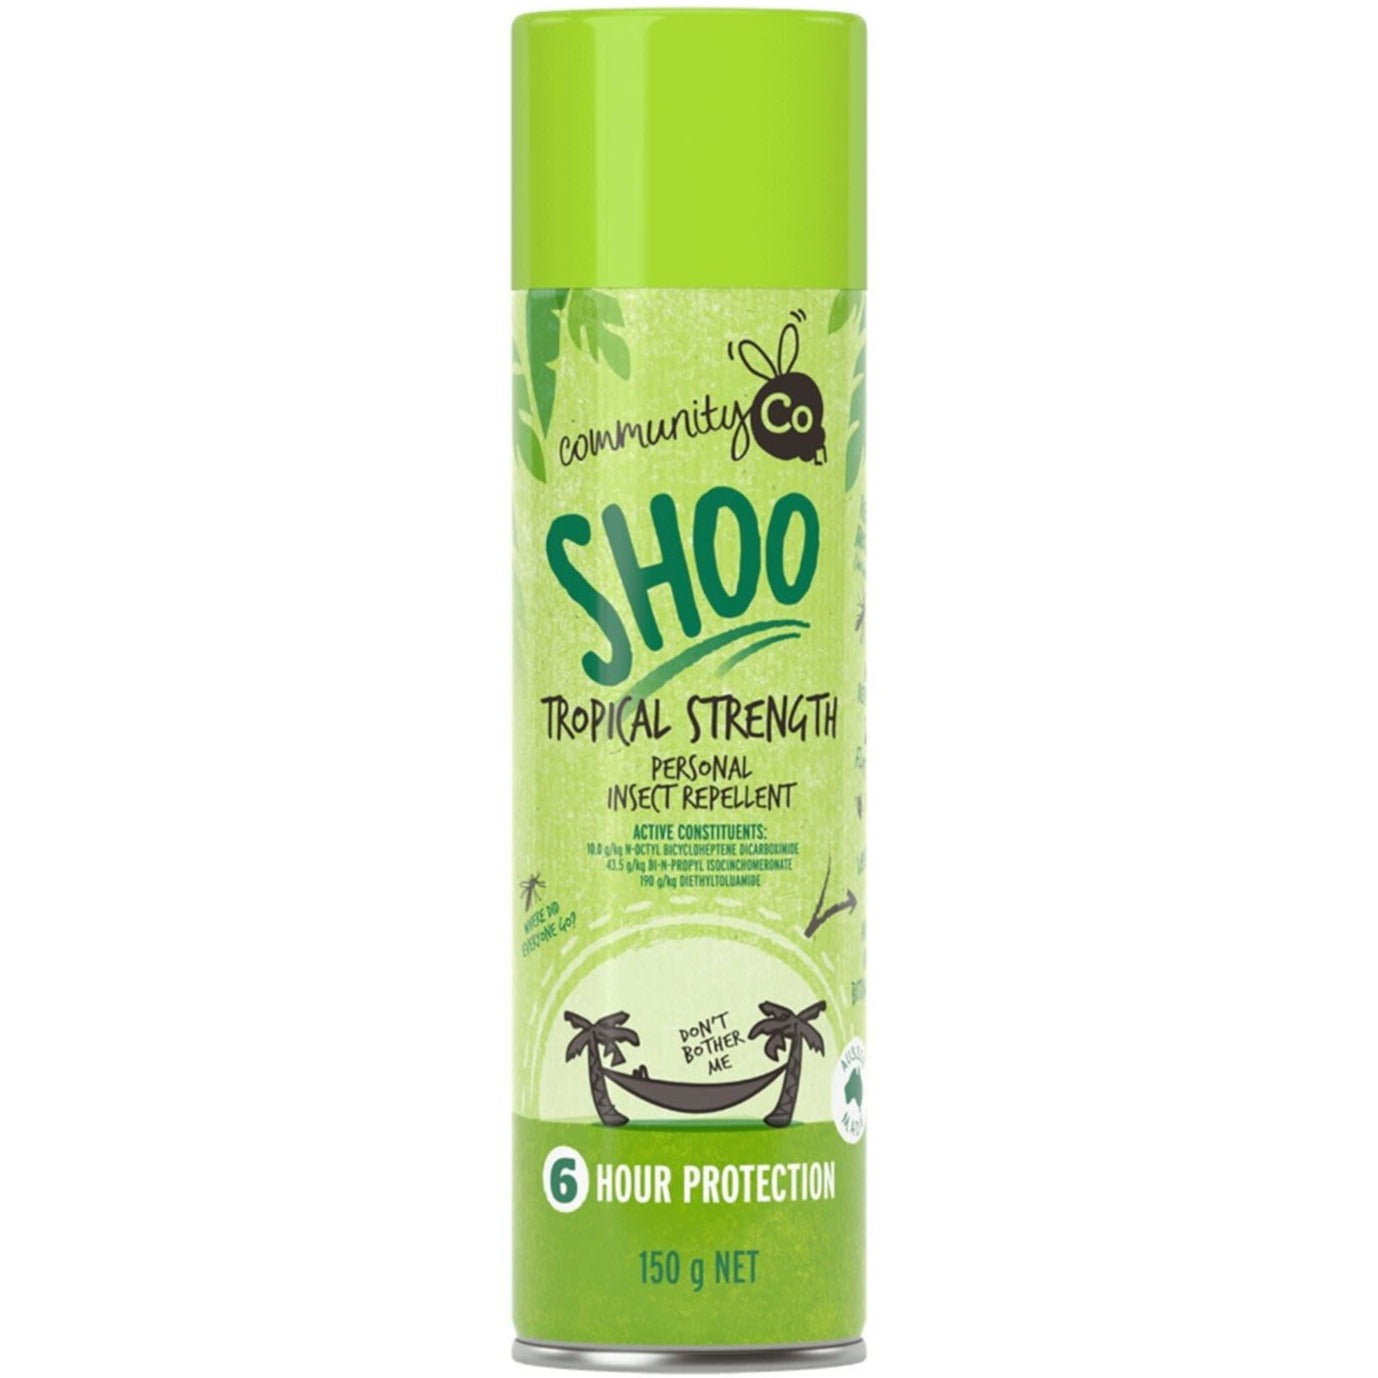 Shoo Tropical Strength Insect Repellent 150g